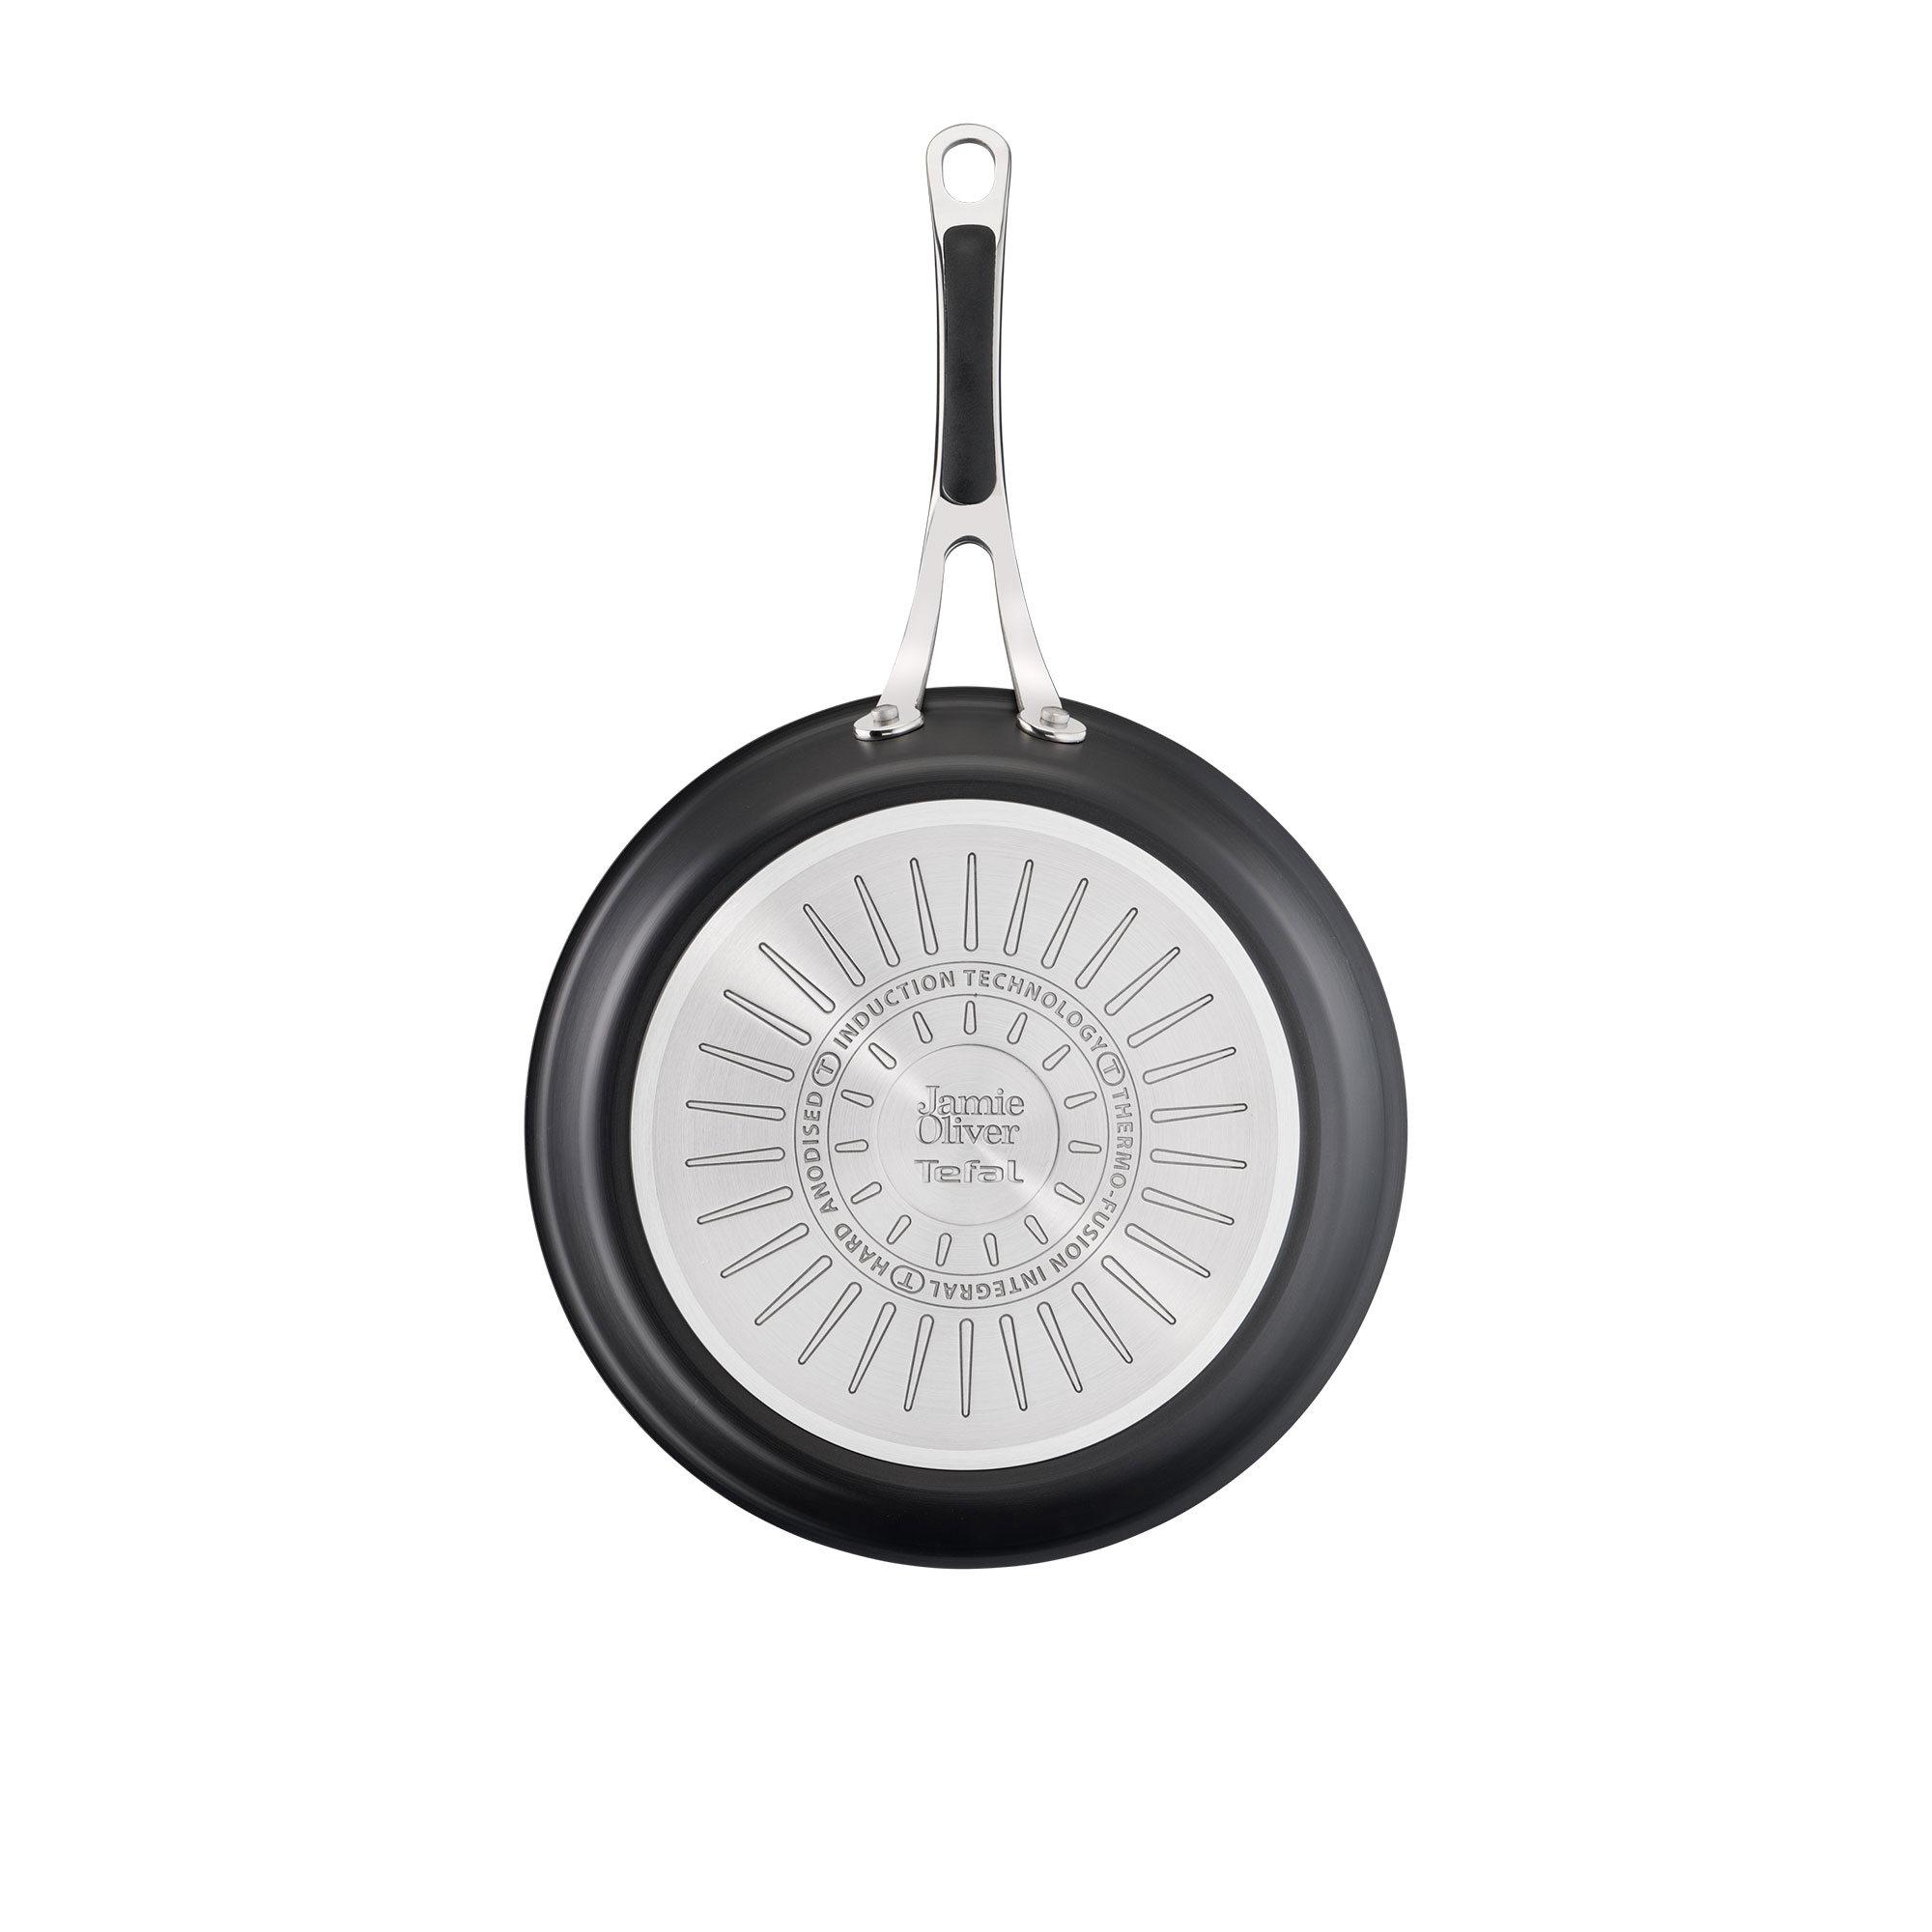 Jamie Oliver by Tefal Cook's Classic Hard Anodised Induction Frypan 24cm Image 4